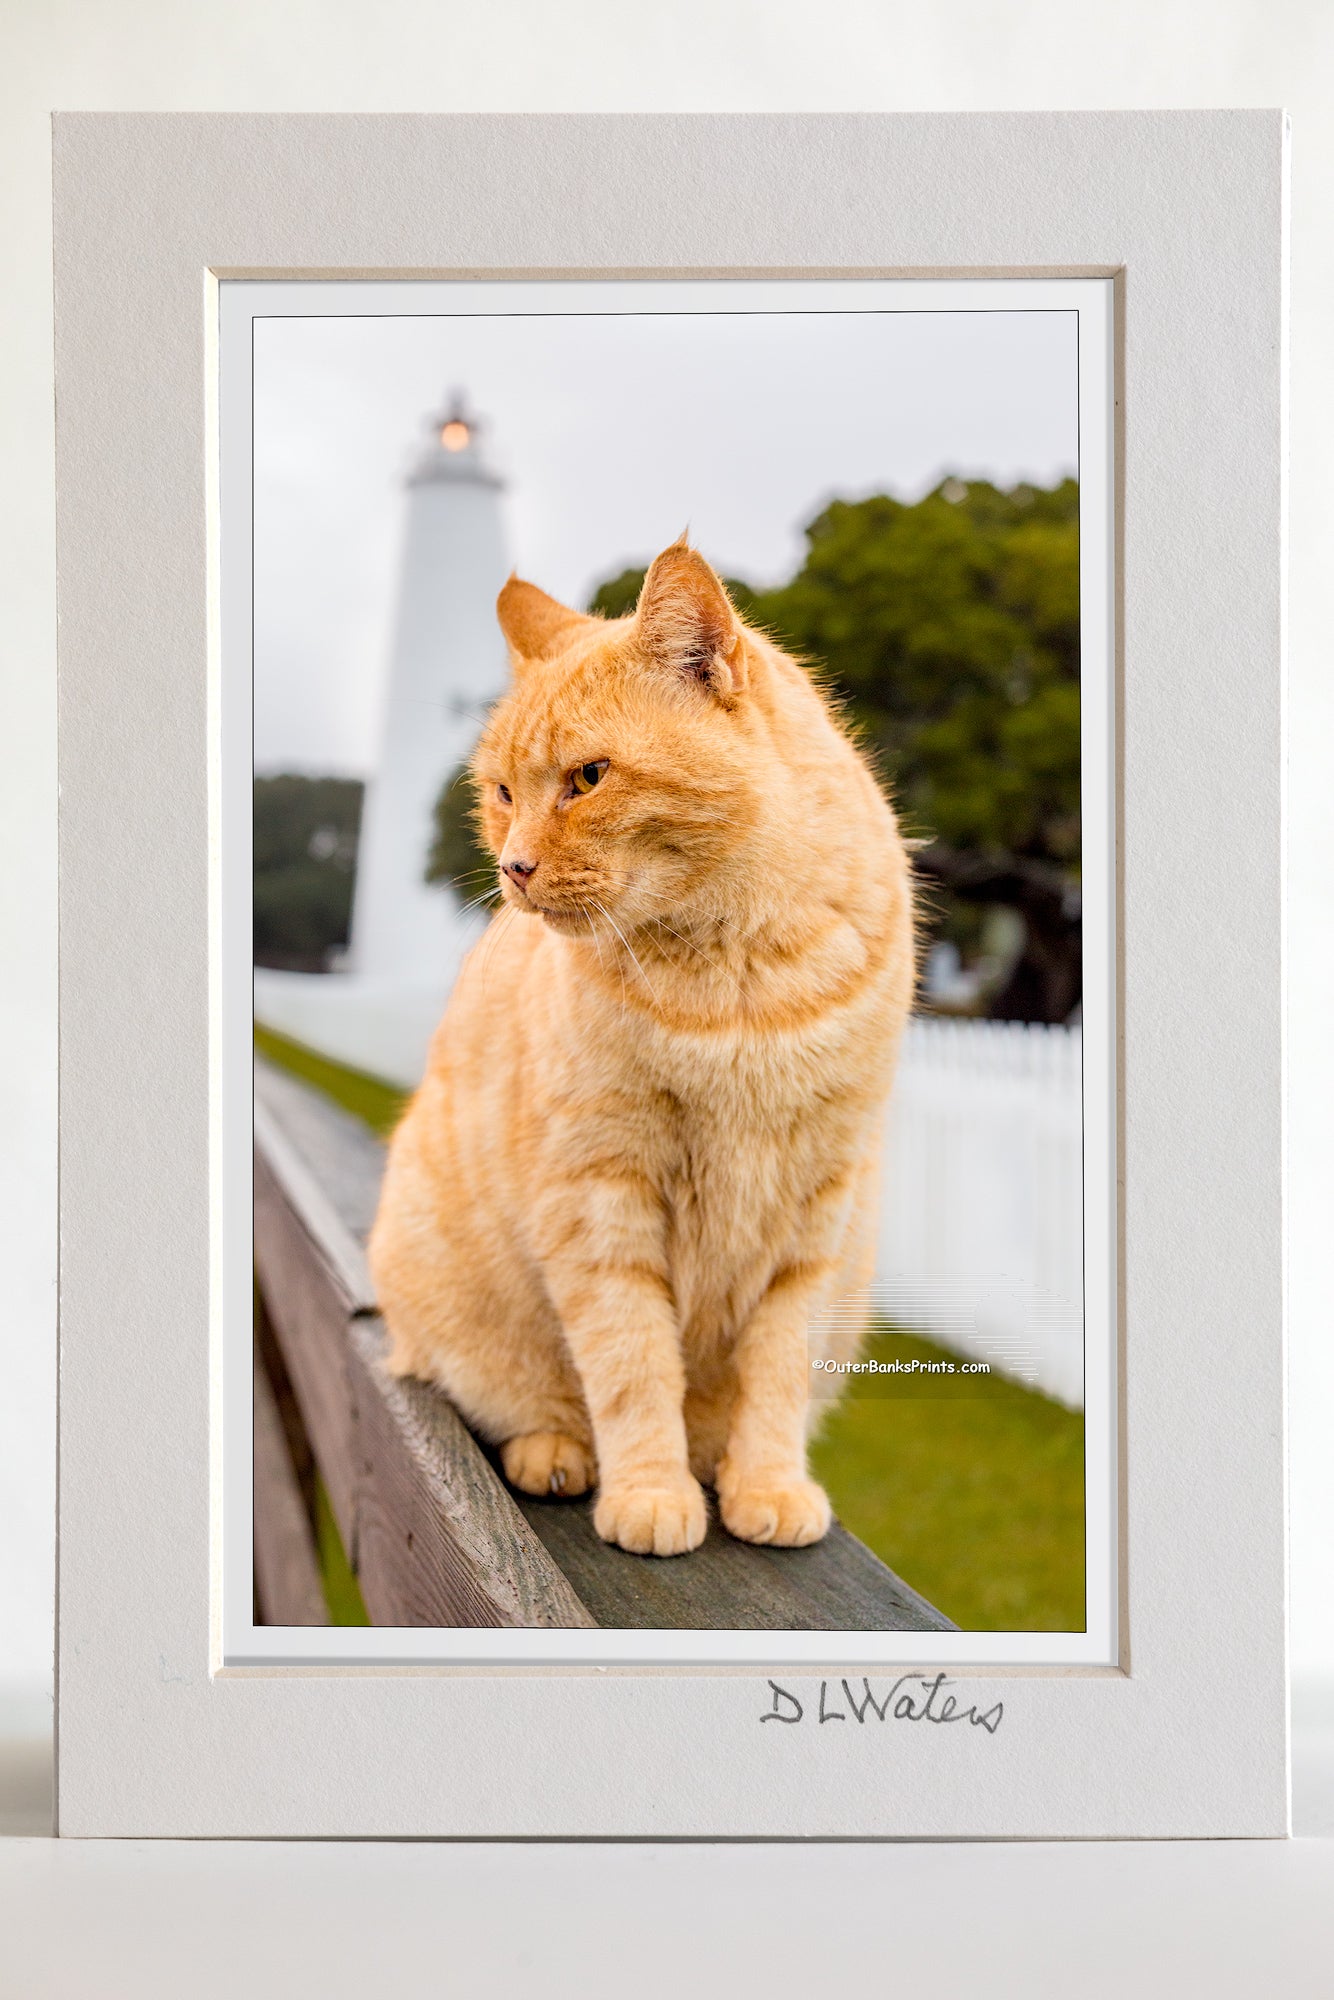 4 x 6 luster print in a 5 x 7 ivory mat of Yellow tabby keeps watch over Ocracoke Lighthouse as the morning storm clears.